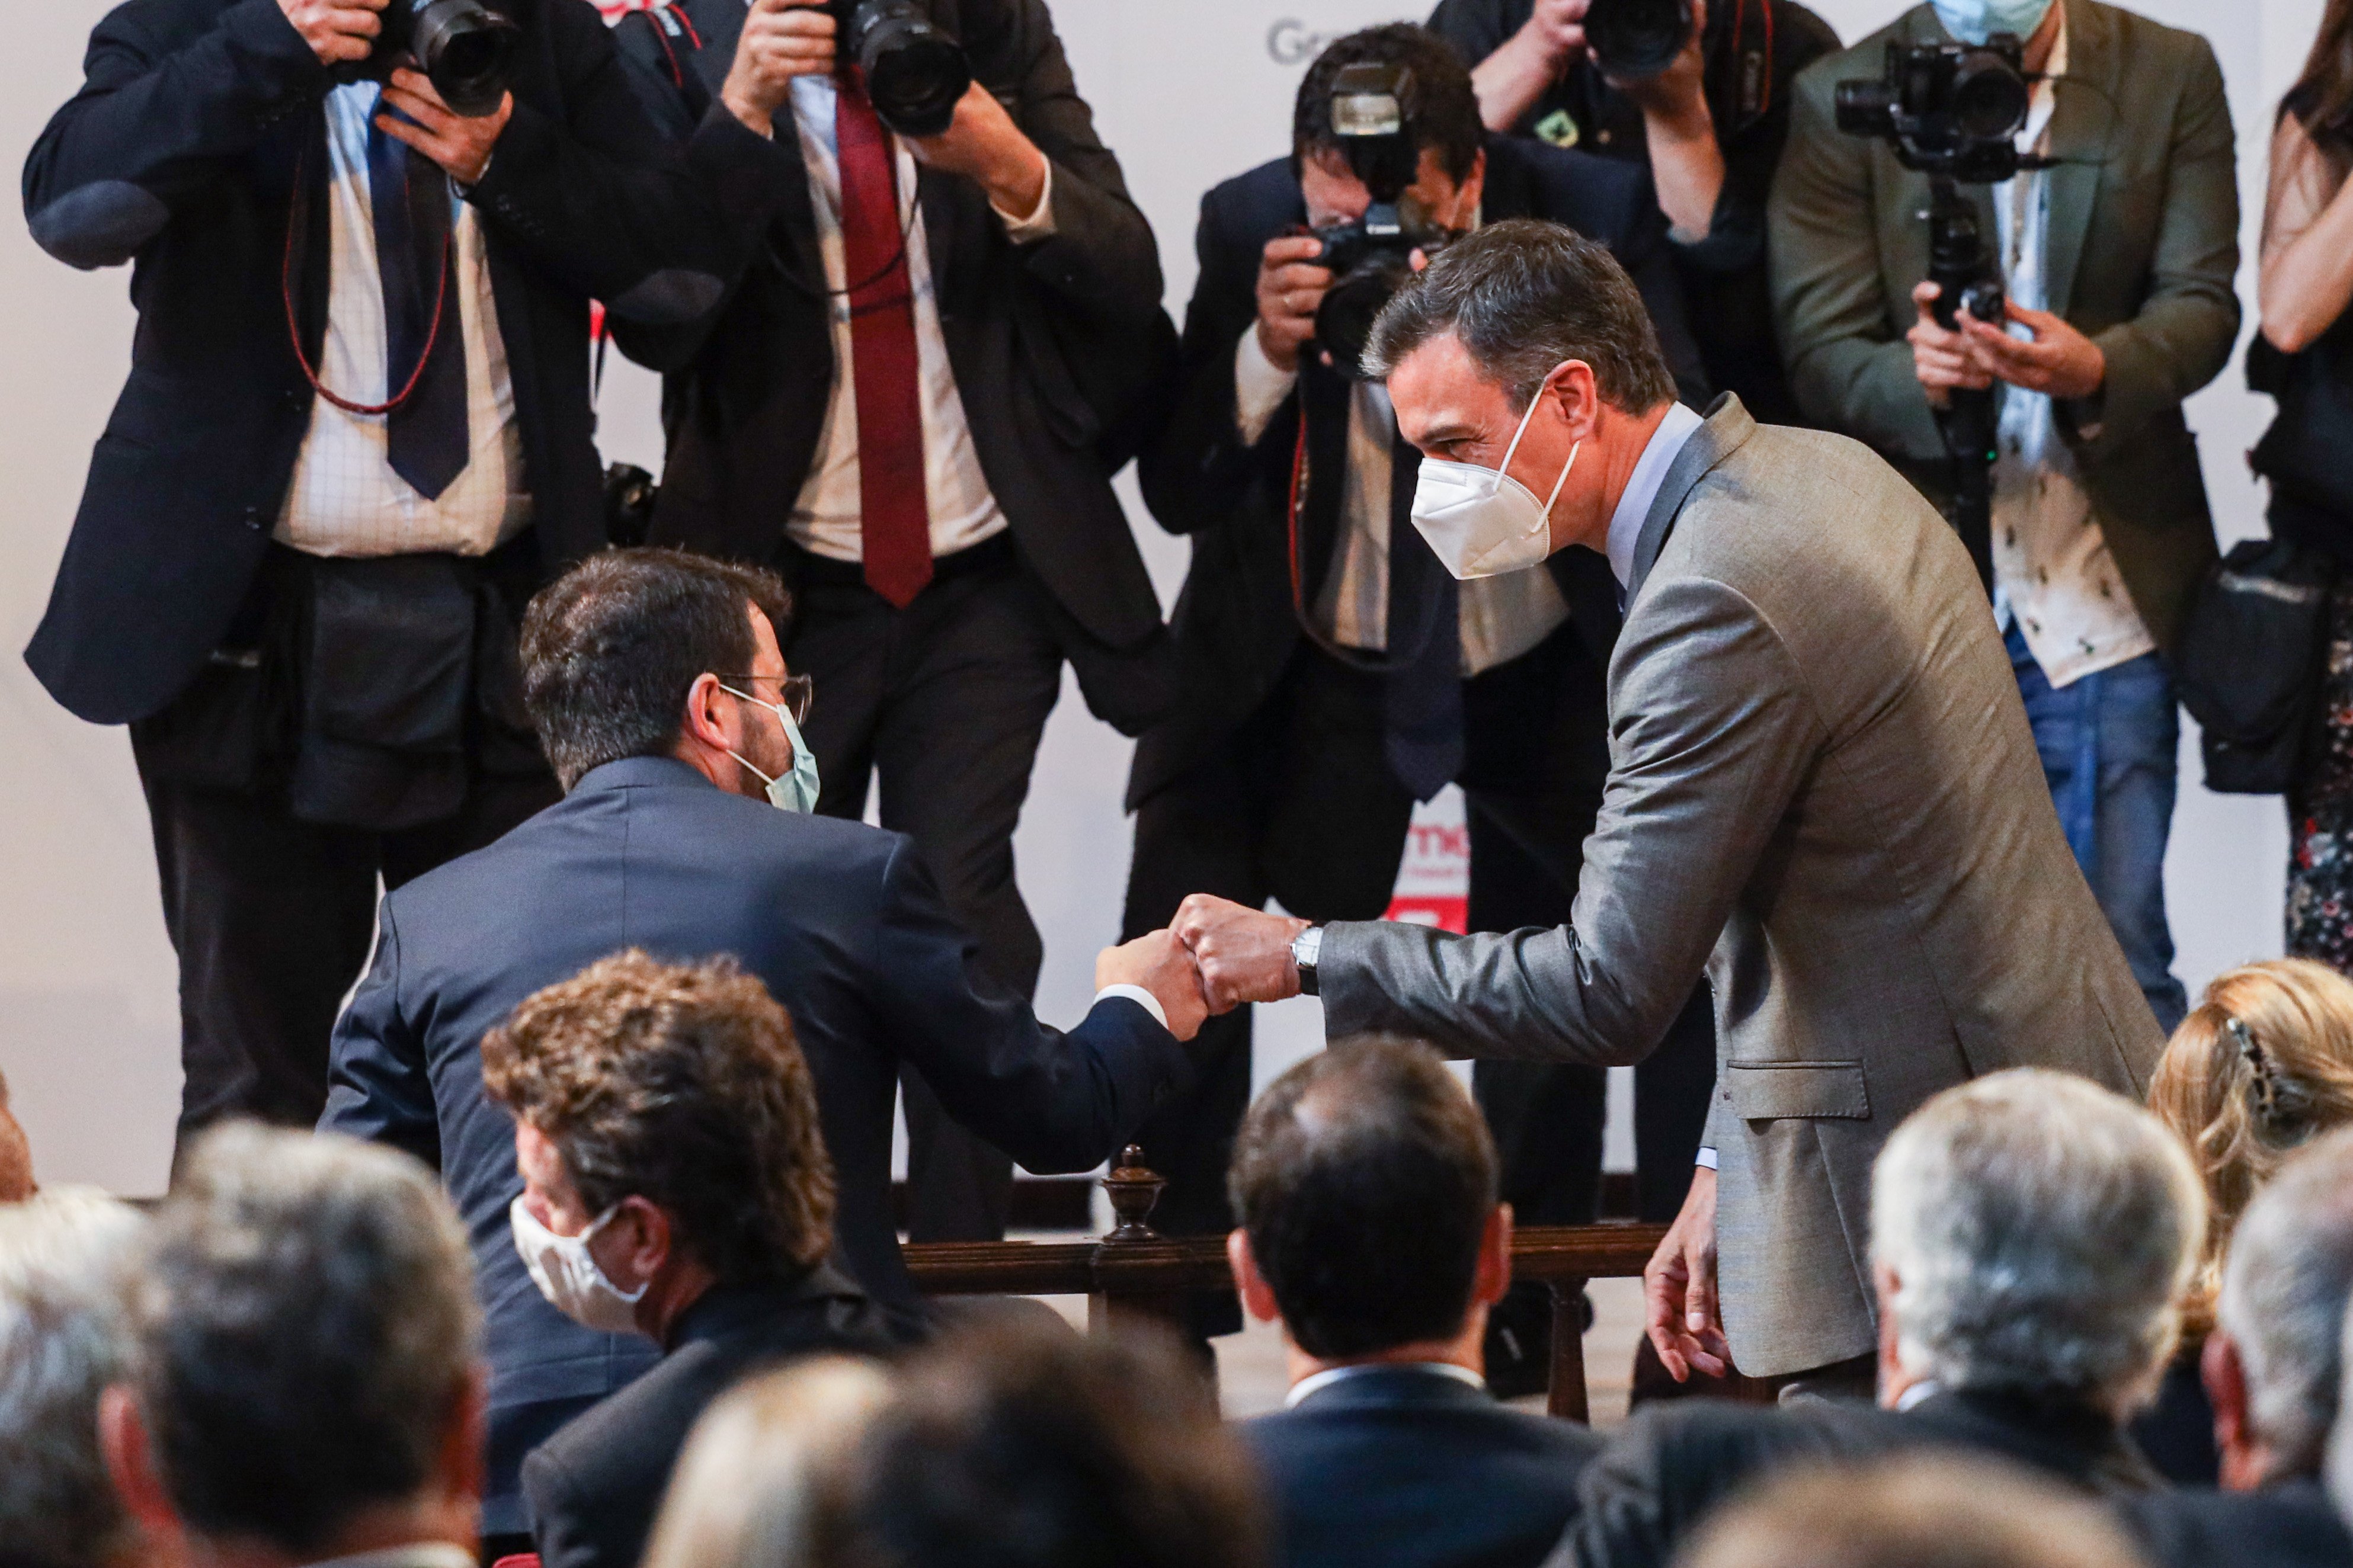 Gestures and messages in first Aragonès-Sánchez face-to-face: "A new us"